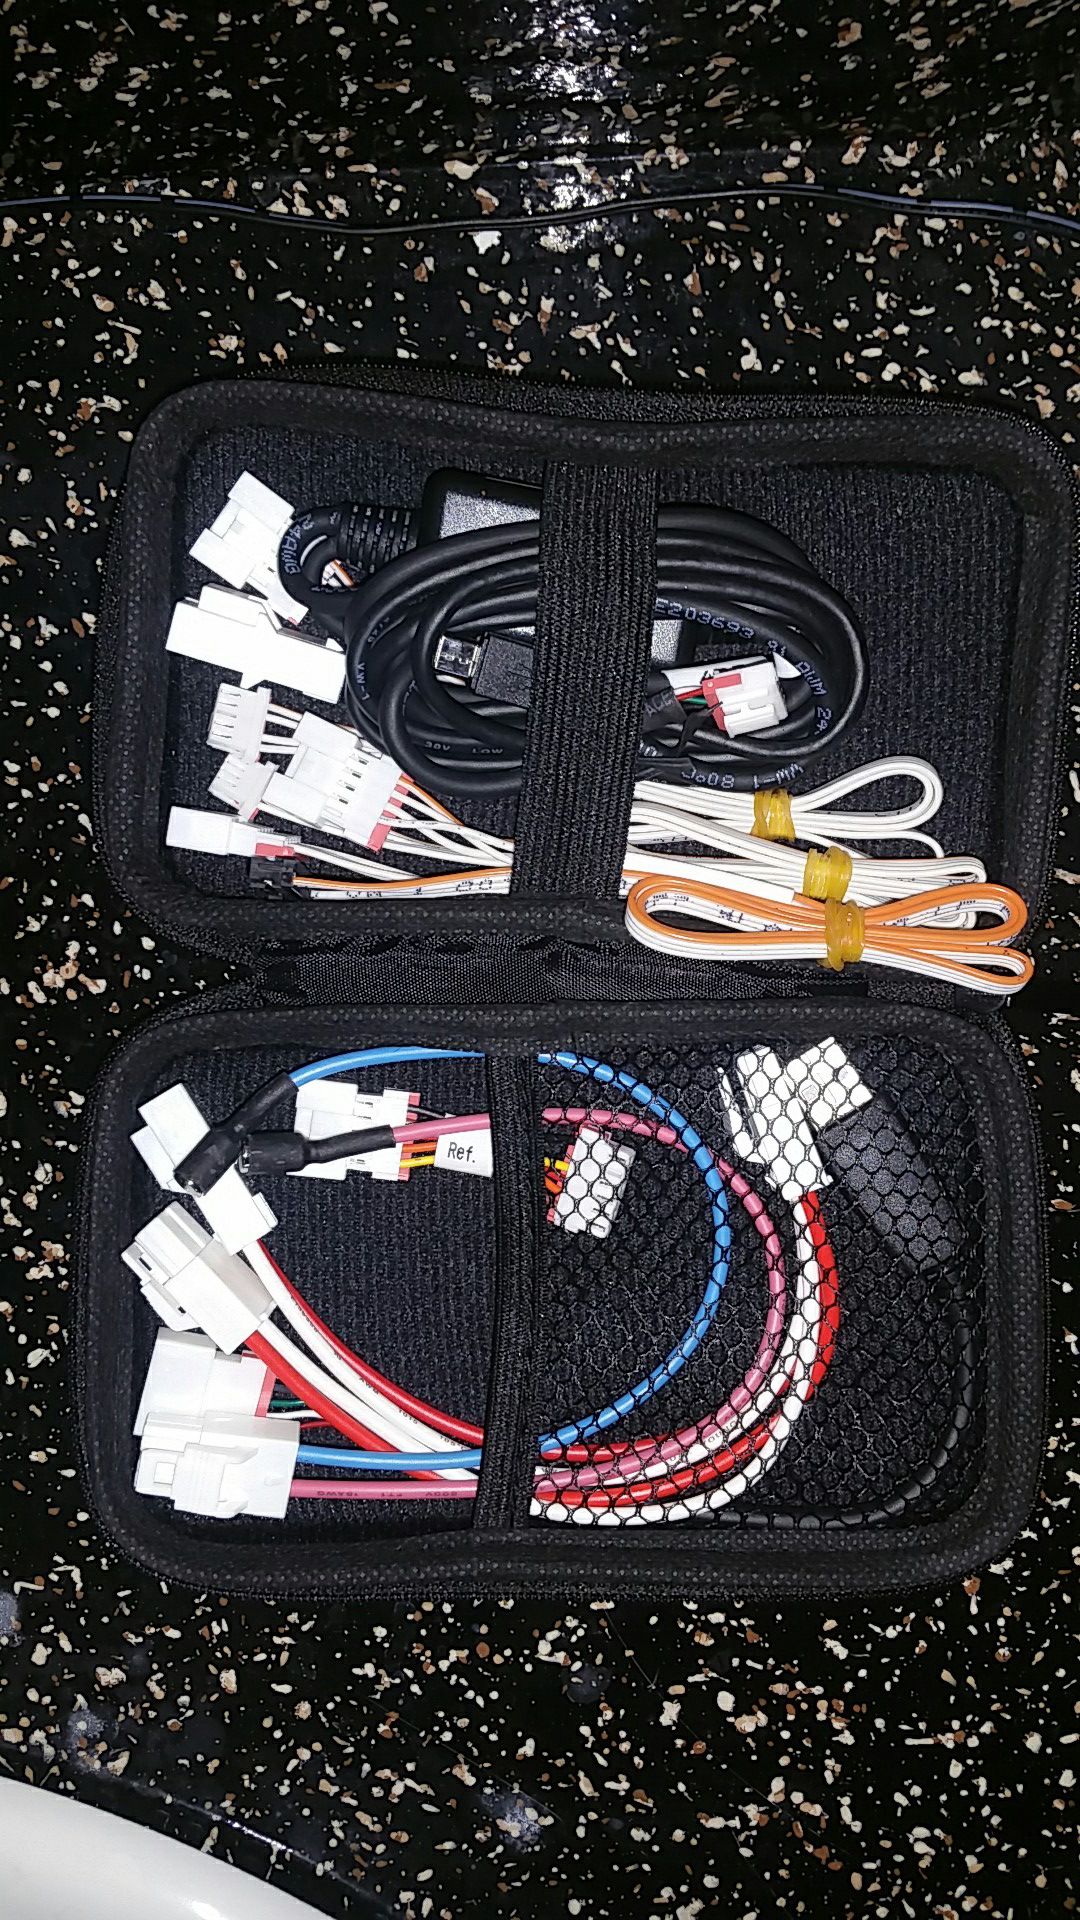 Samsung Appliance Programing Cables